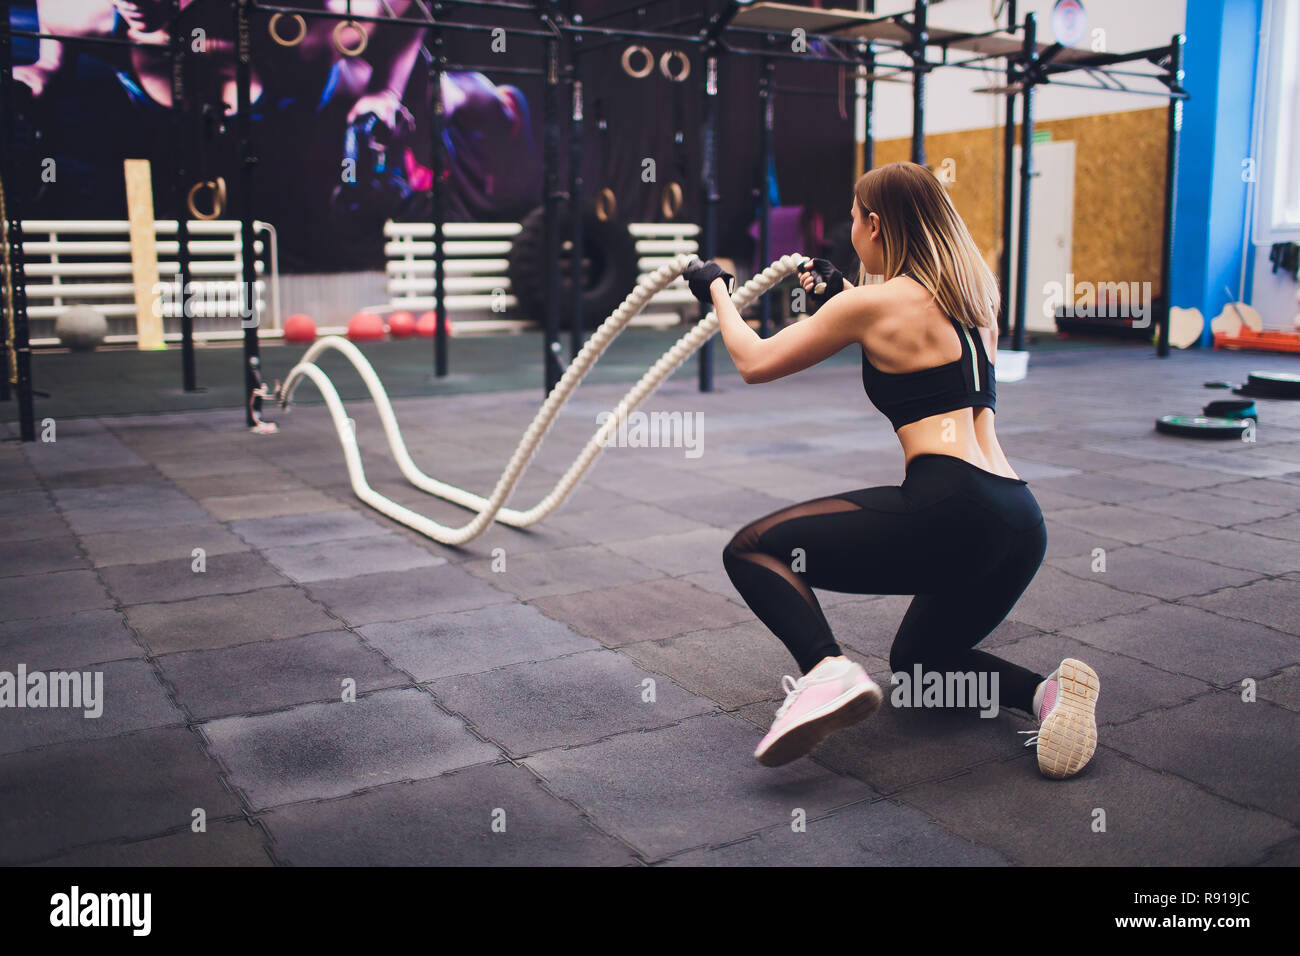 Strong Woman Exercising With Battle Ropes At The Gym